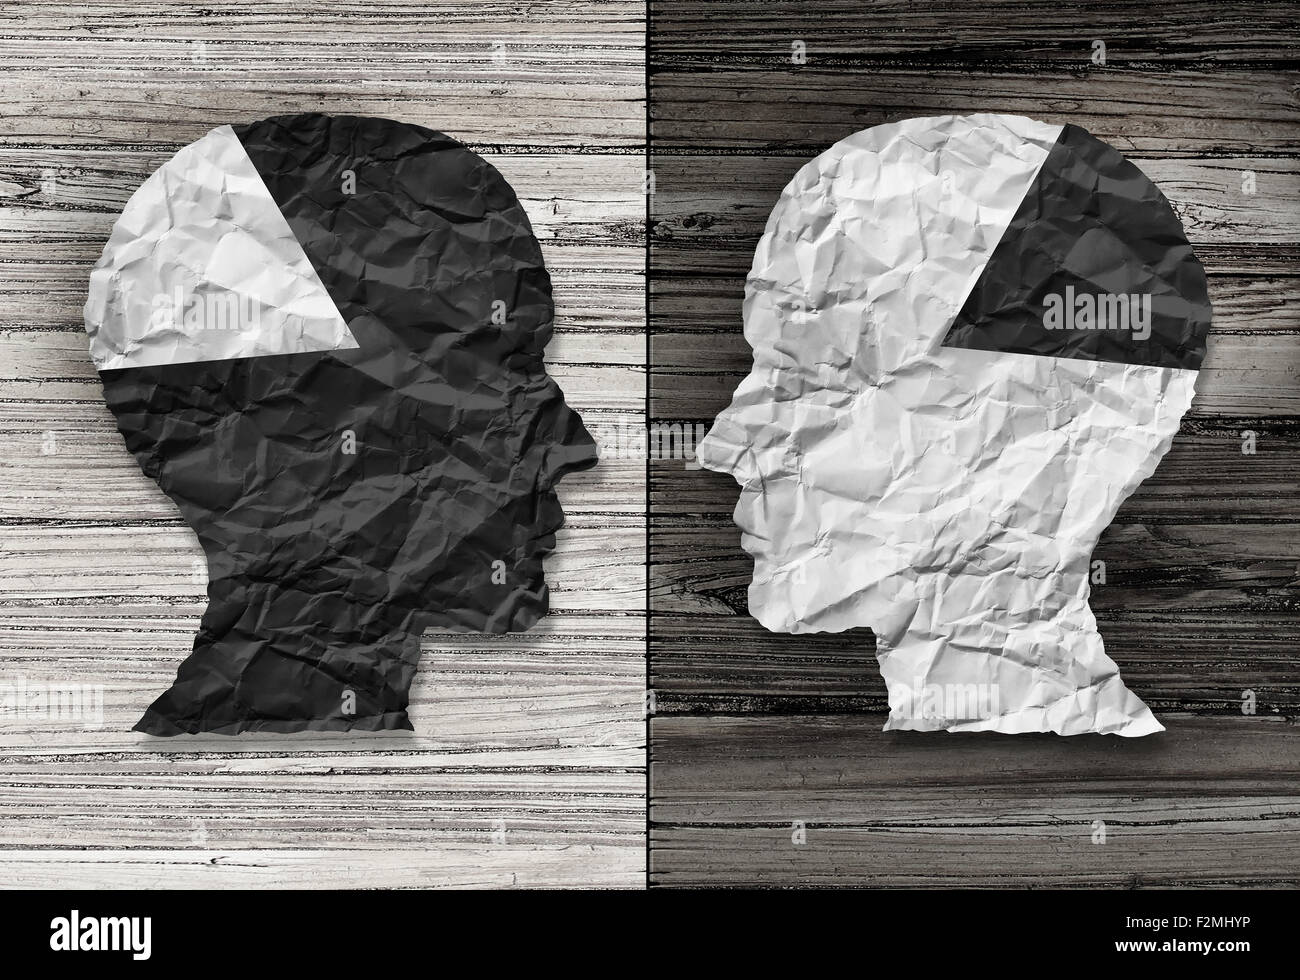 Ethnic equality concept and racial justice symbol as a black and white crumpled paper shaped as a human head on old rustic wood Stock Photo